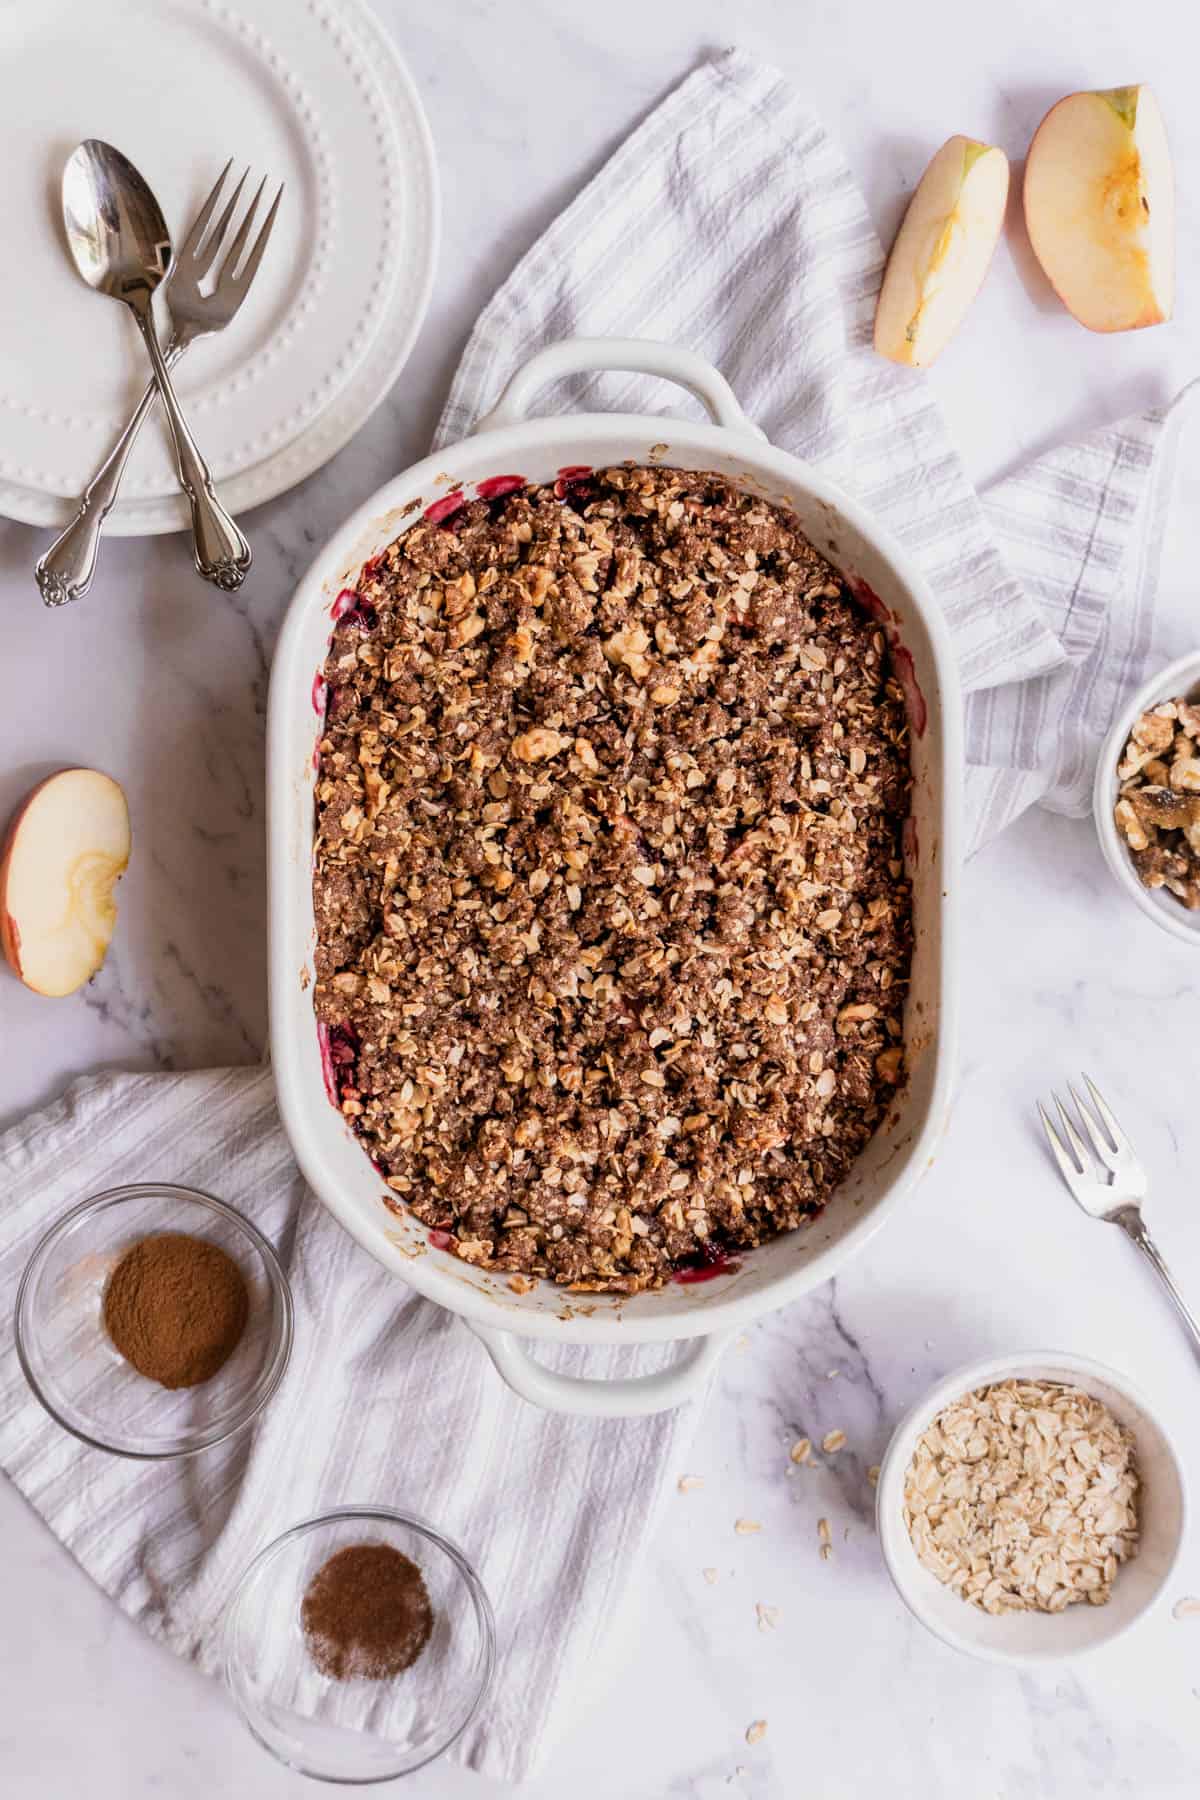 apple-and-blackberry-crumble.